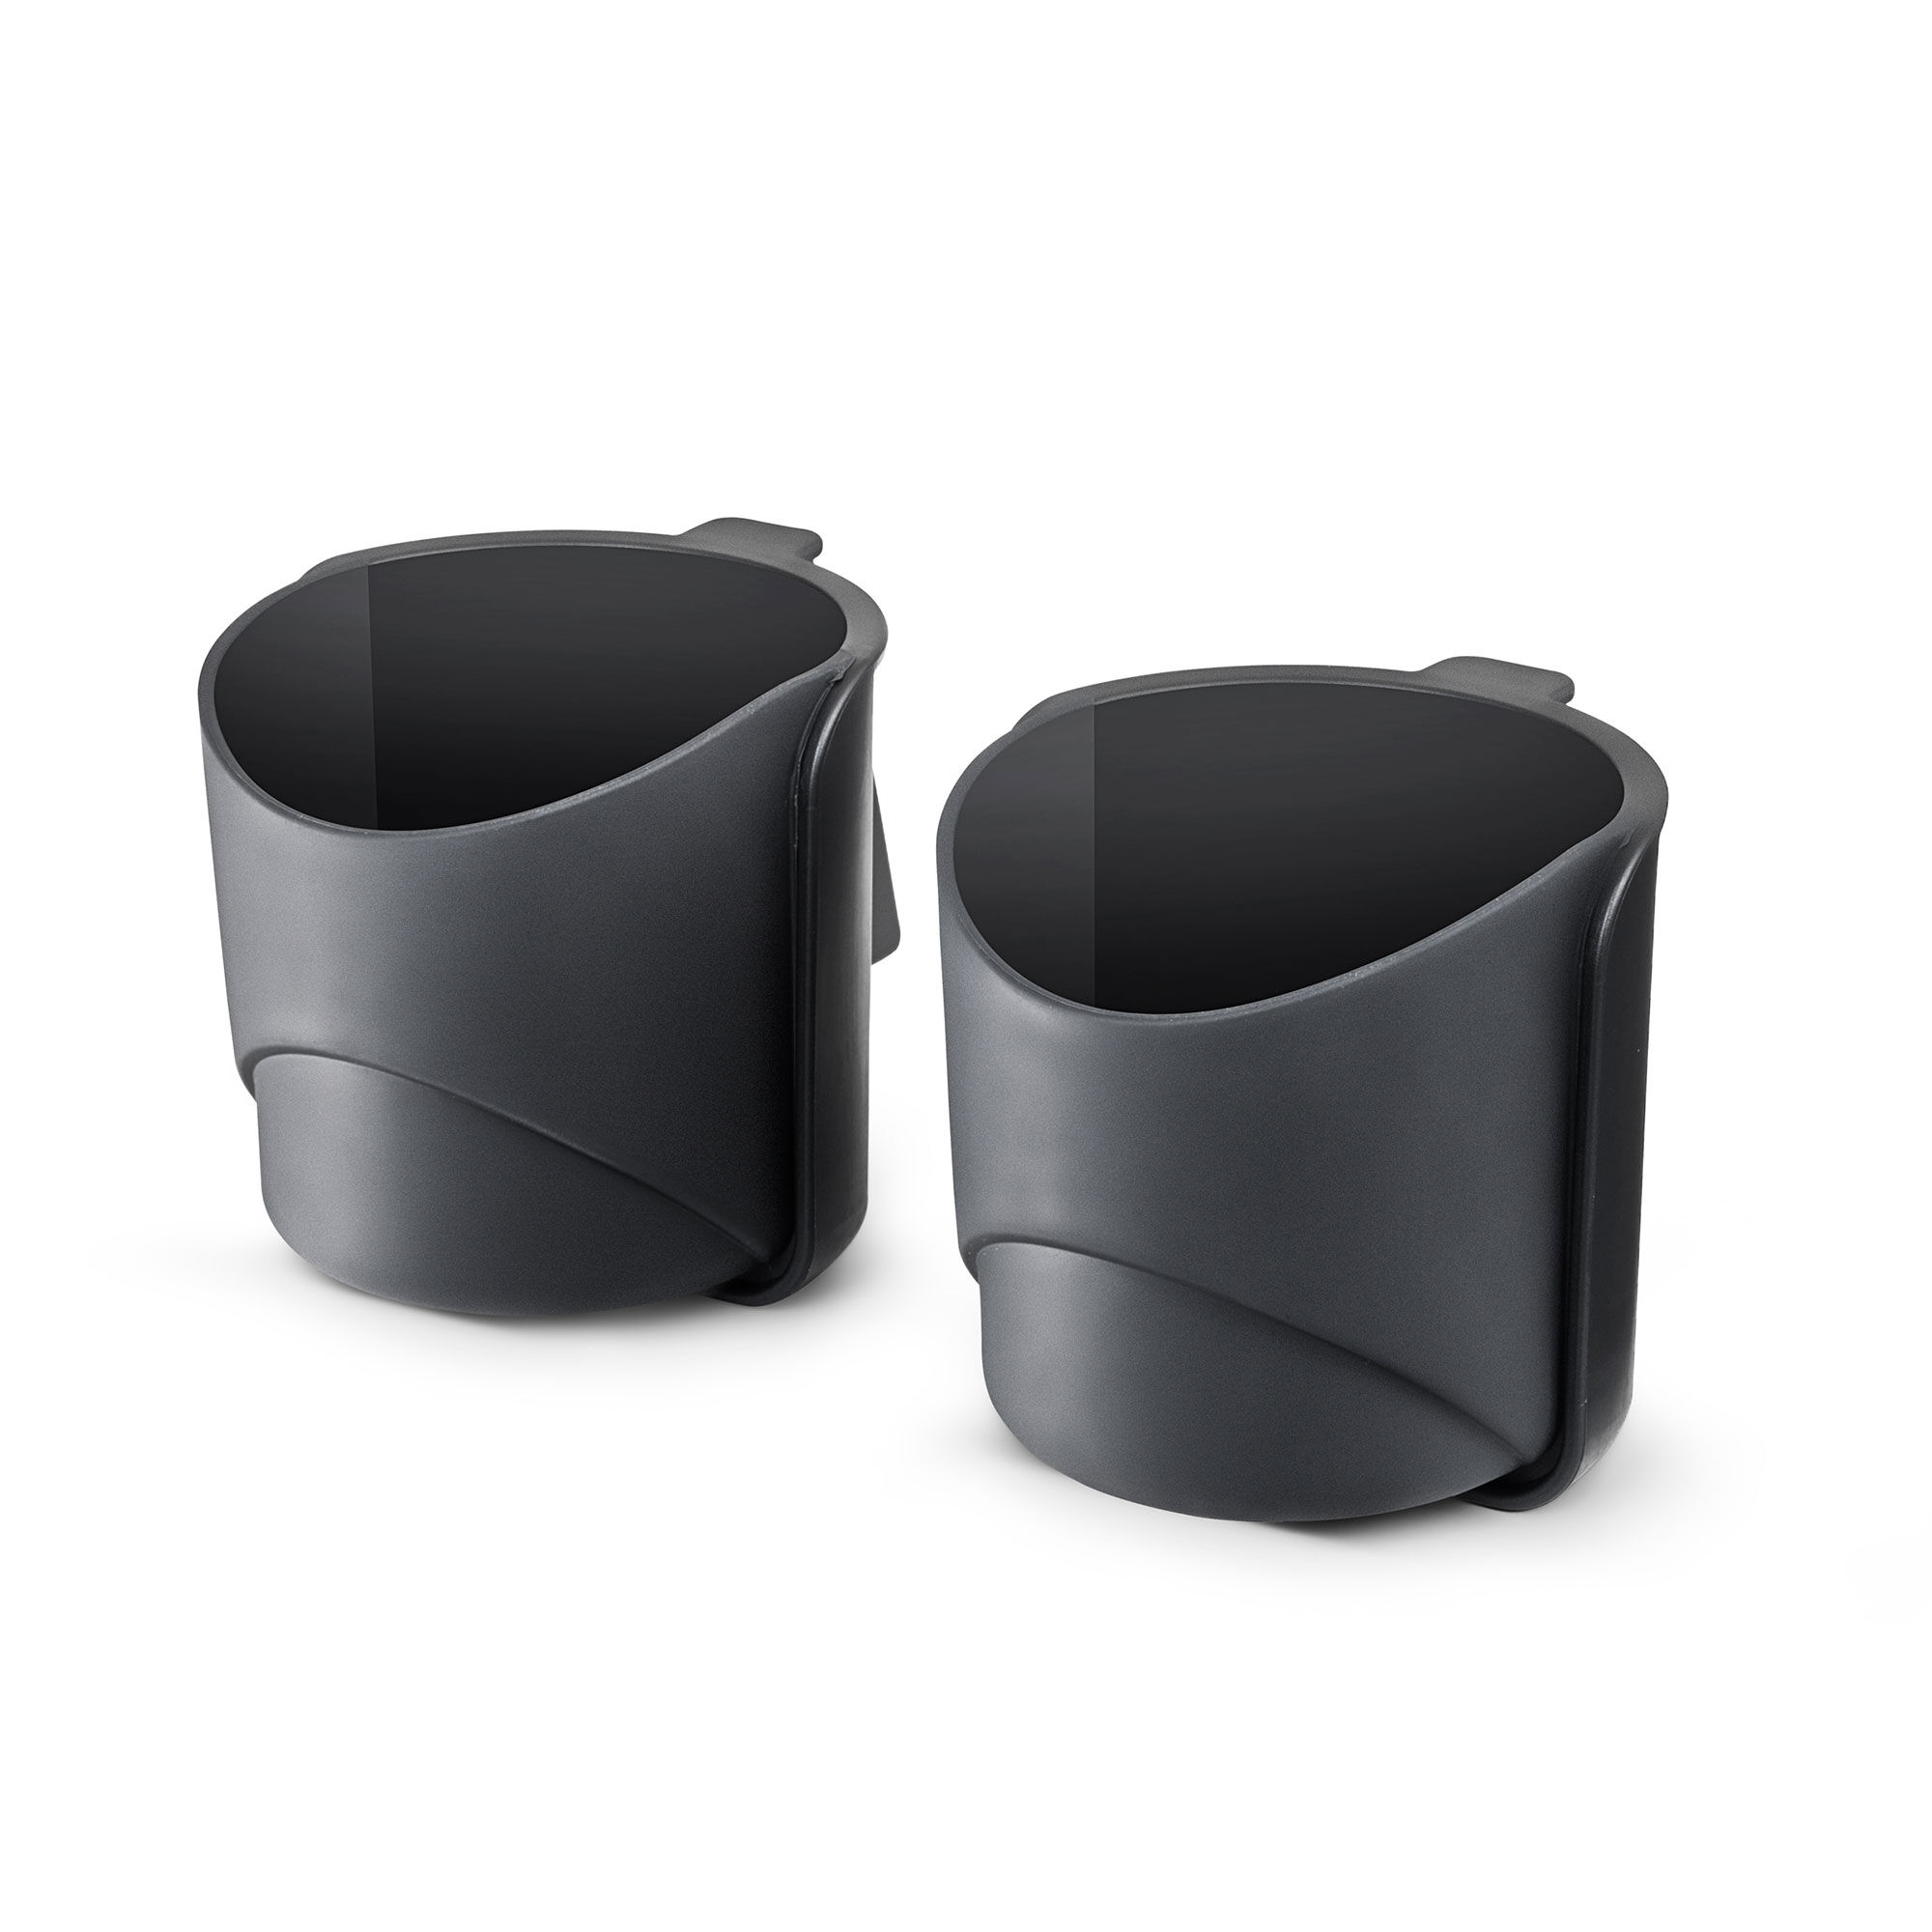 NextFit Car Seat Cup Holder | ChiccoUSA